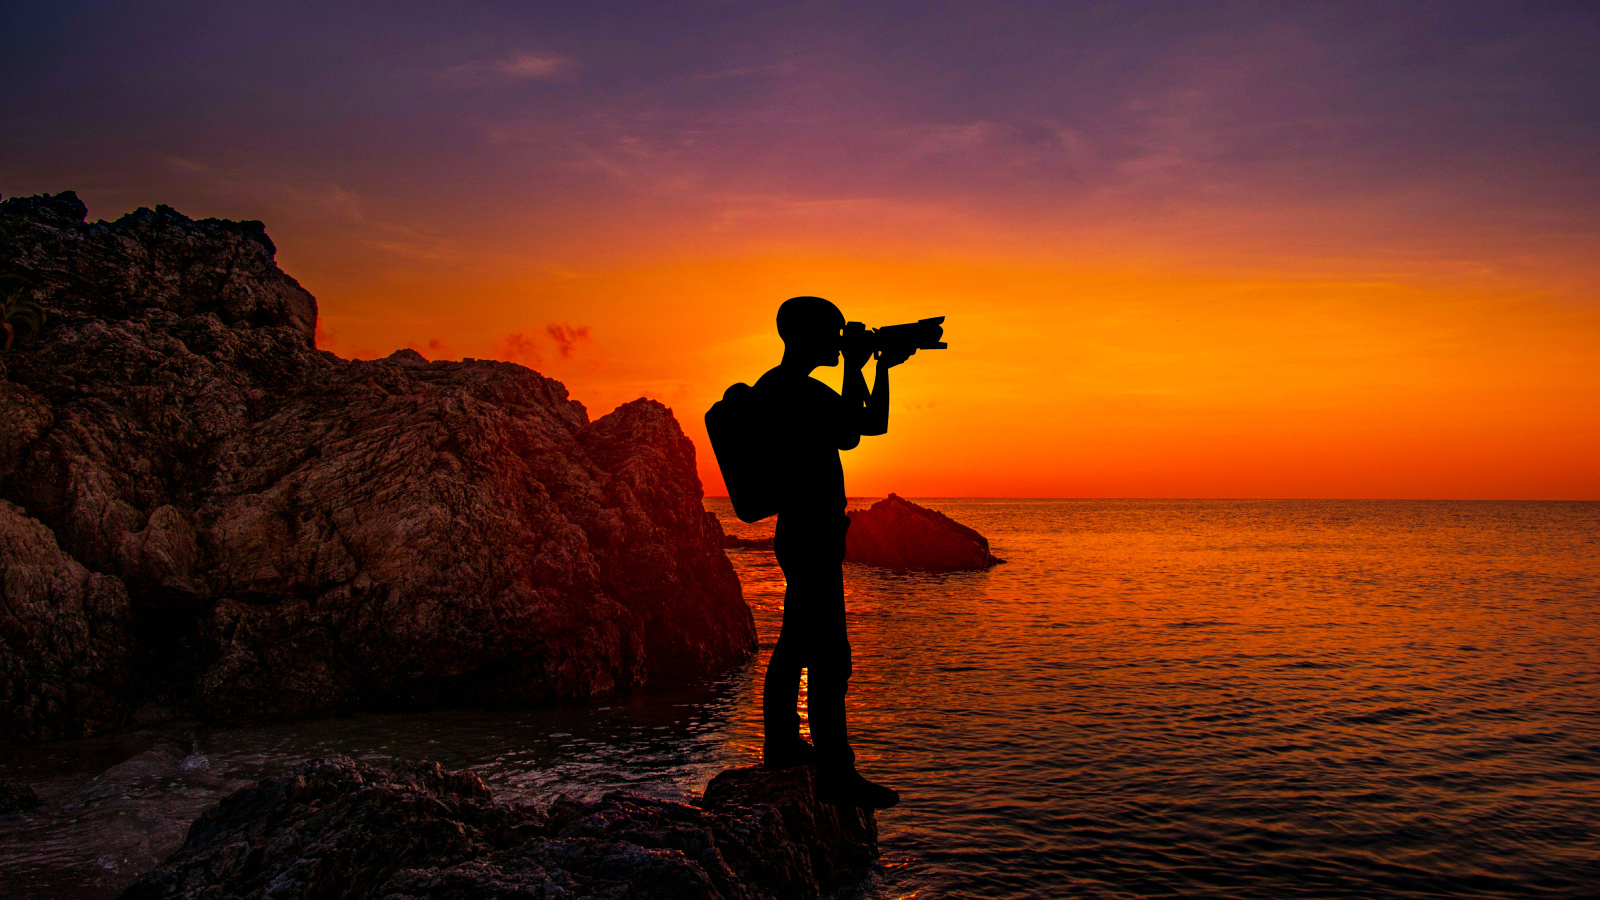 A man photographs a sunset by the sea